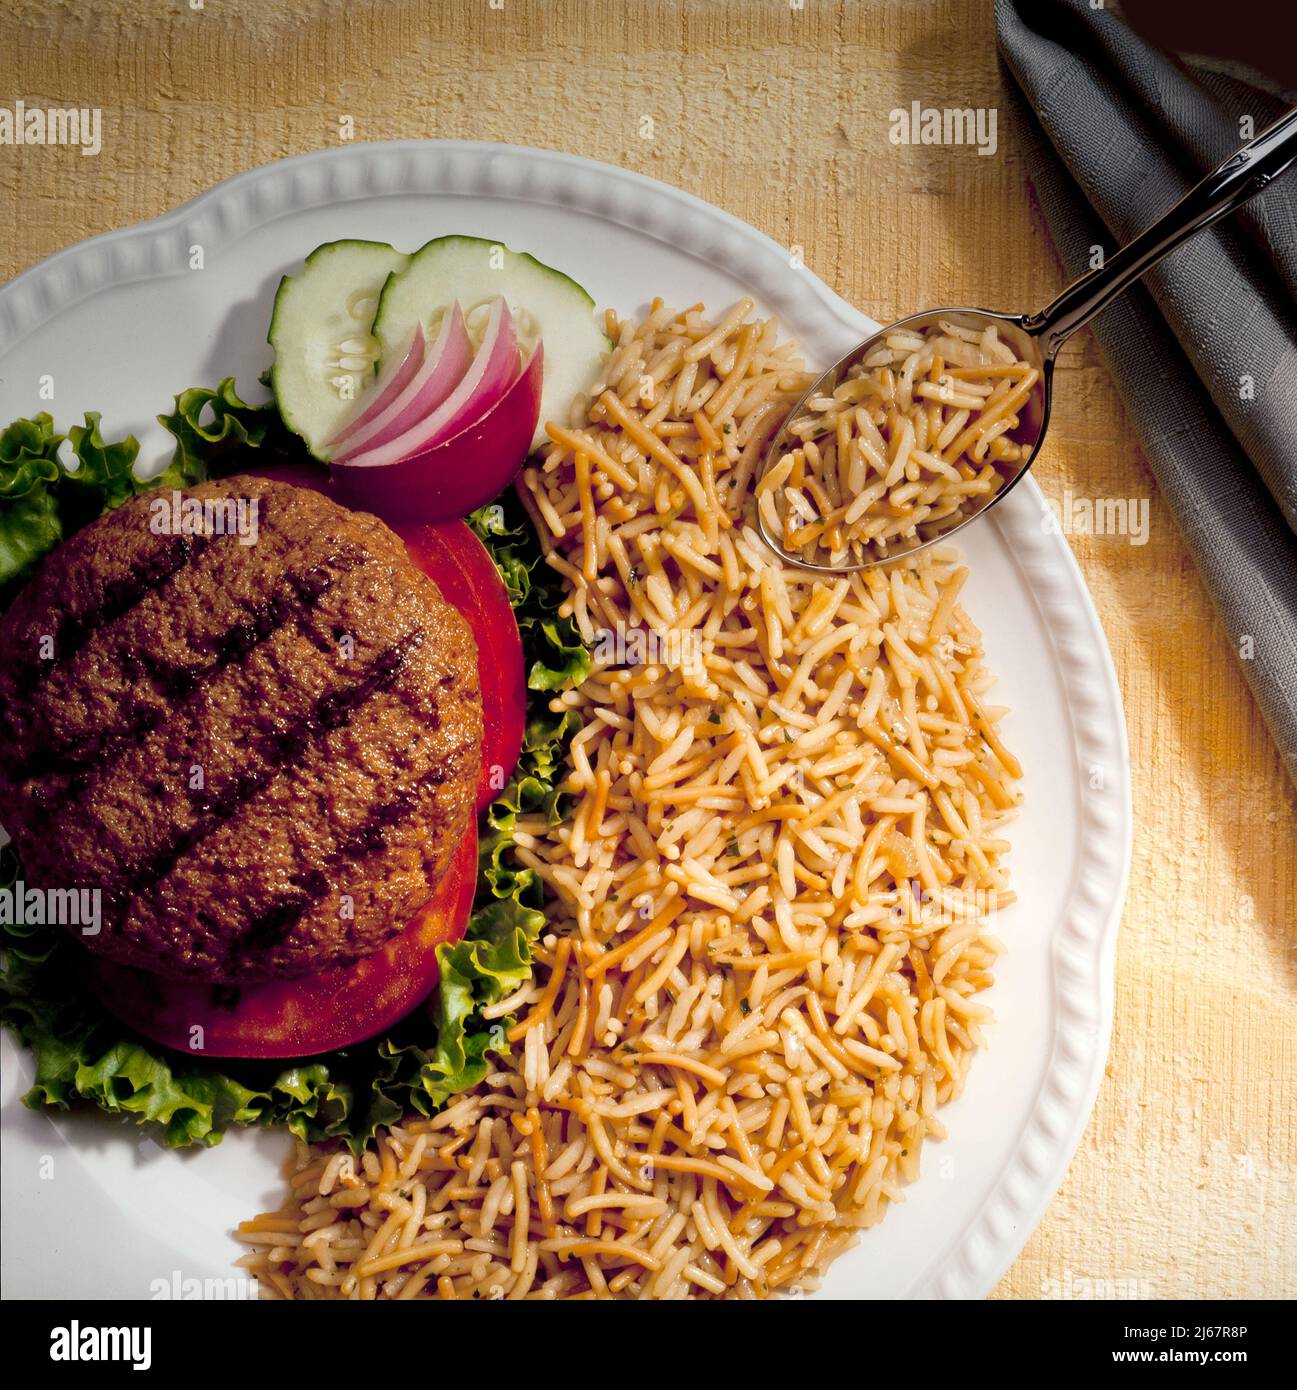 Grilled Burger and Rice Stock Photo